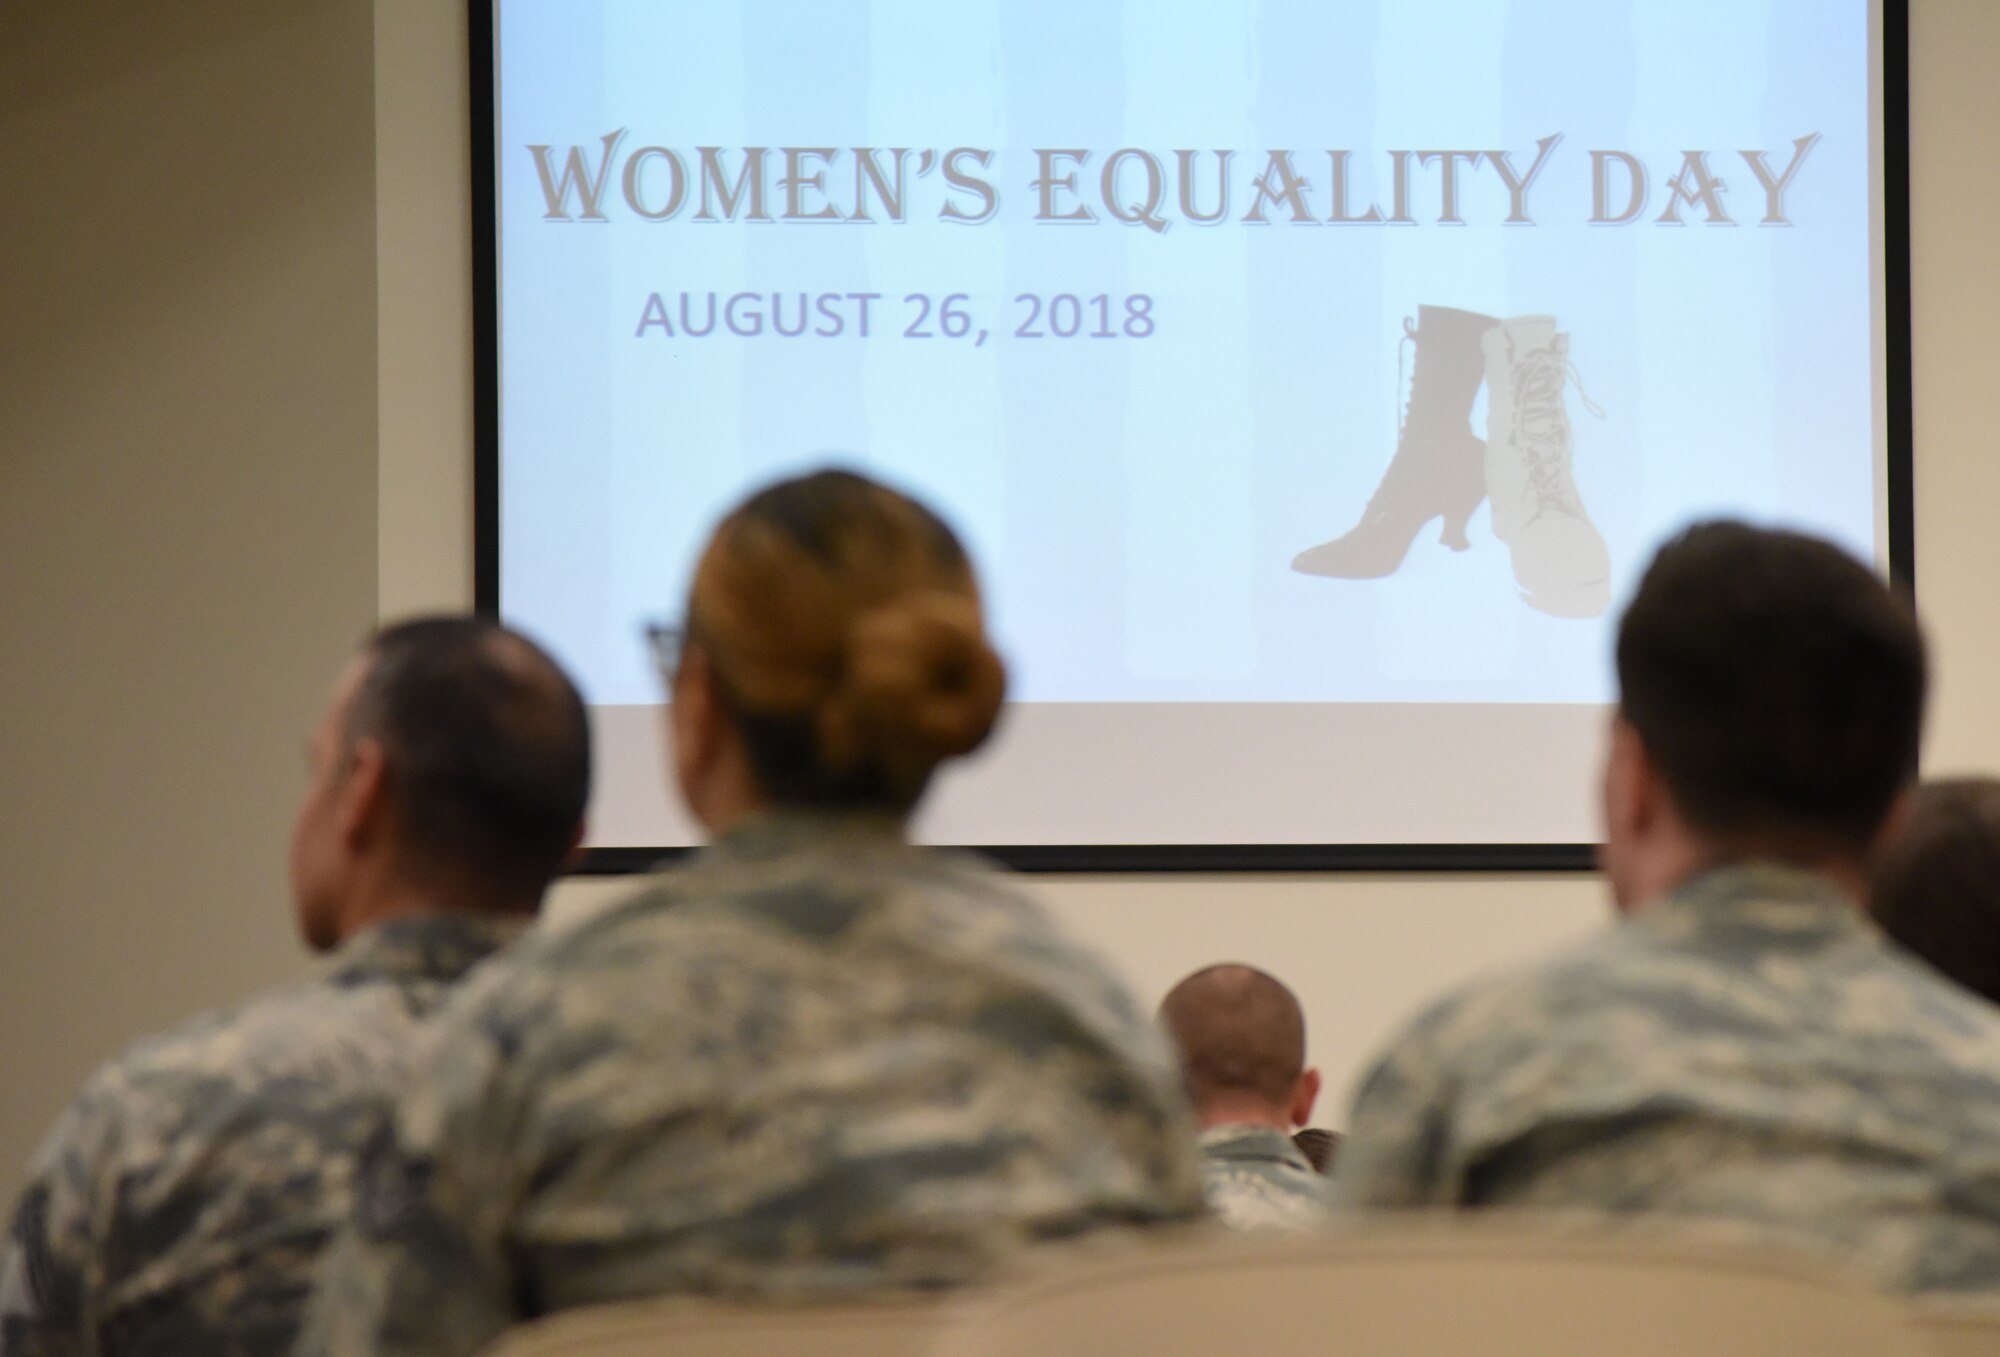 Keesler personnel attend the 81st Training Wing Women's Equality Day Observance at the Roberts Consolidated Aircraft Maintenance Facility at Keesler Air Force Base, Mississippi, Aug. 21, 2018. Women�s Equality Day commemorates the passage of the 19th Amendment to the U.S. Constitution, granting the right for women to vote. The amendment was first introduced in 1878. In 1971, the U.S. Congress designated Aug. 26 as Women�s Equality Day. (U.S. Air Force photo by Kemberly Groue)